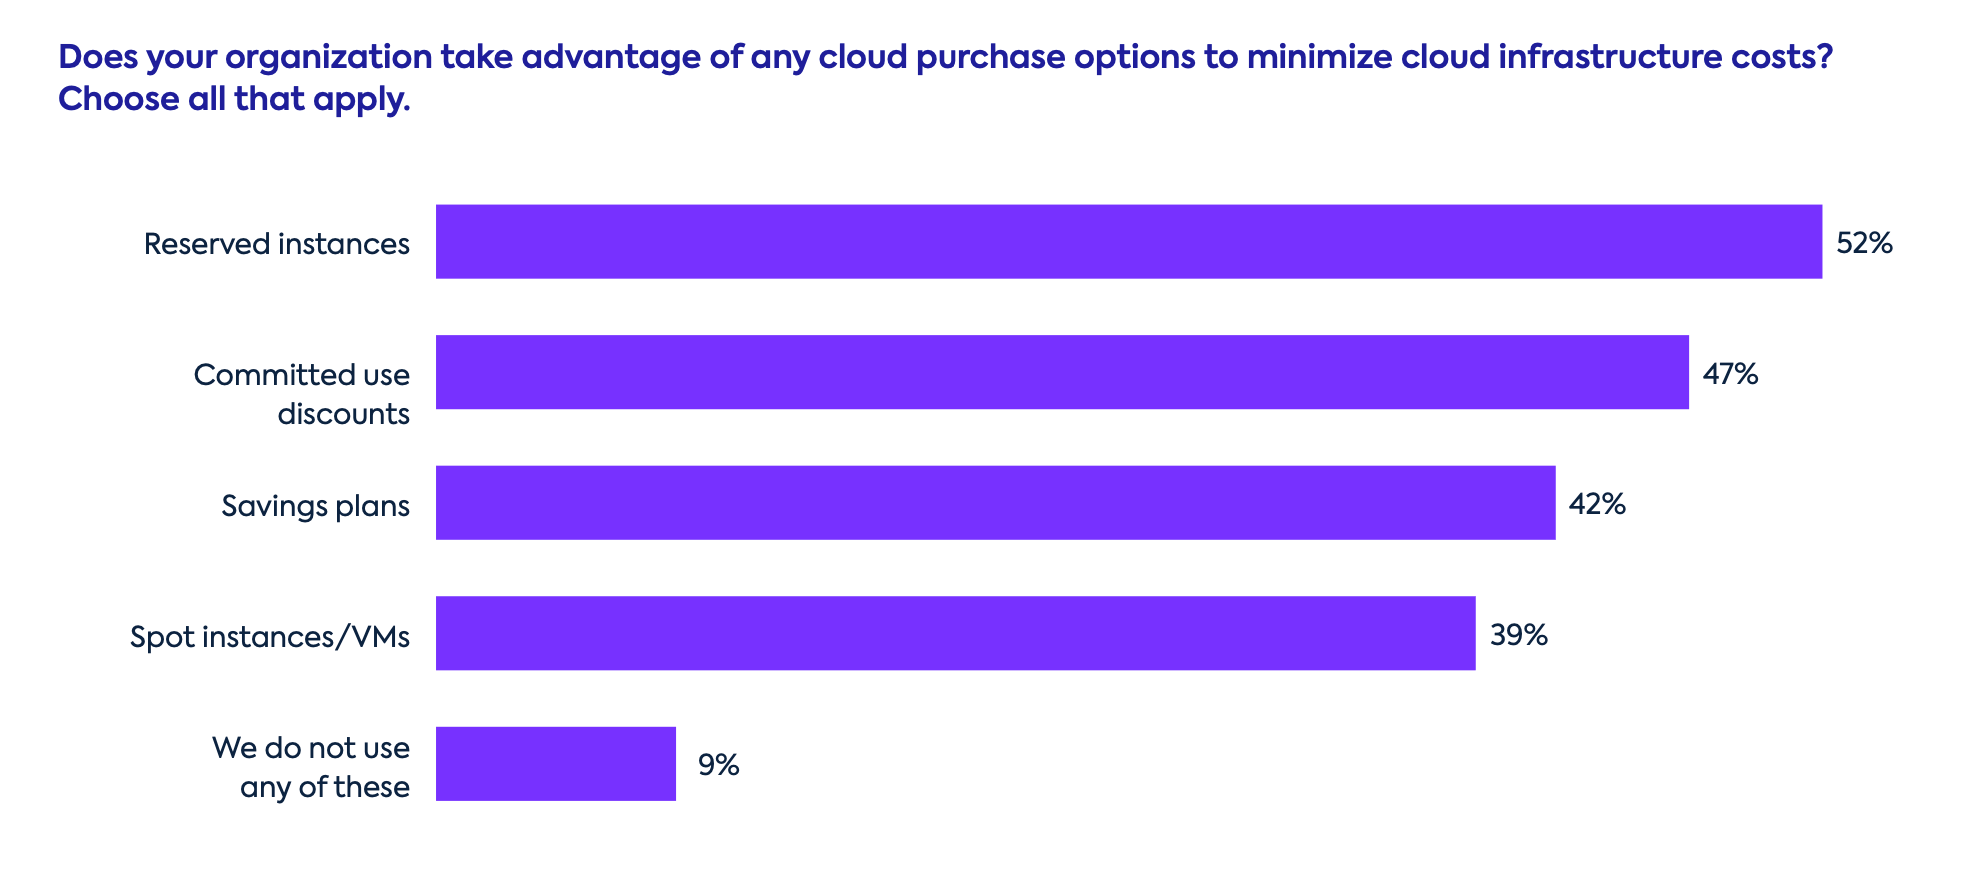 Learn more about how enterprises are using cloud purchasing options by downloading the report.